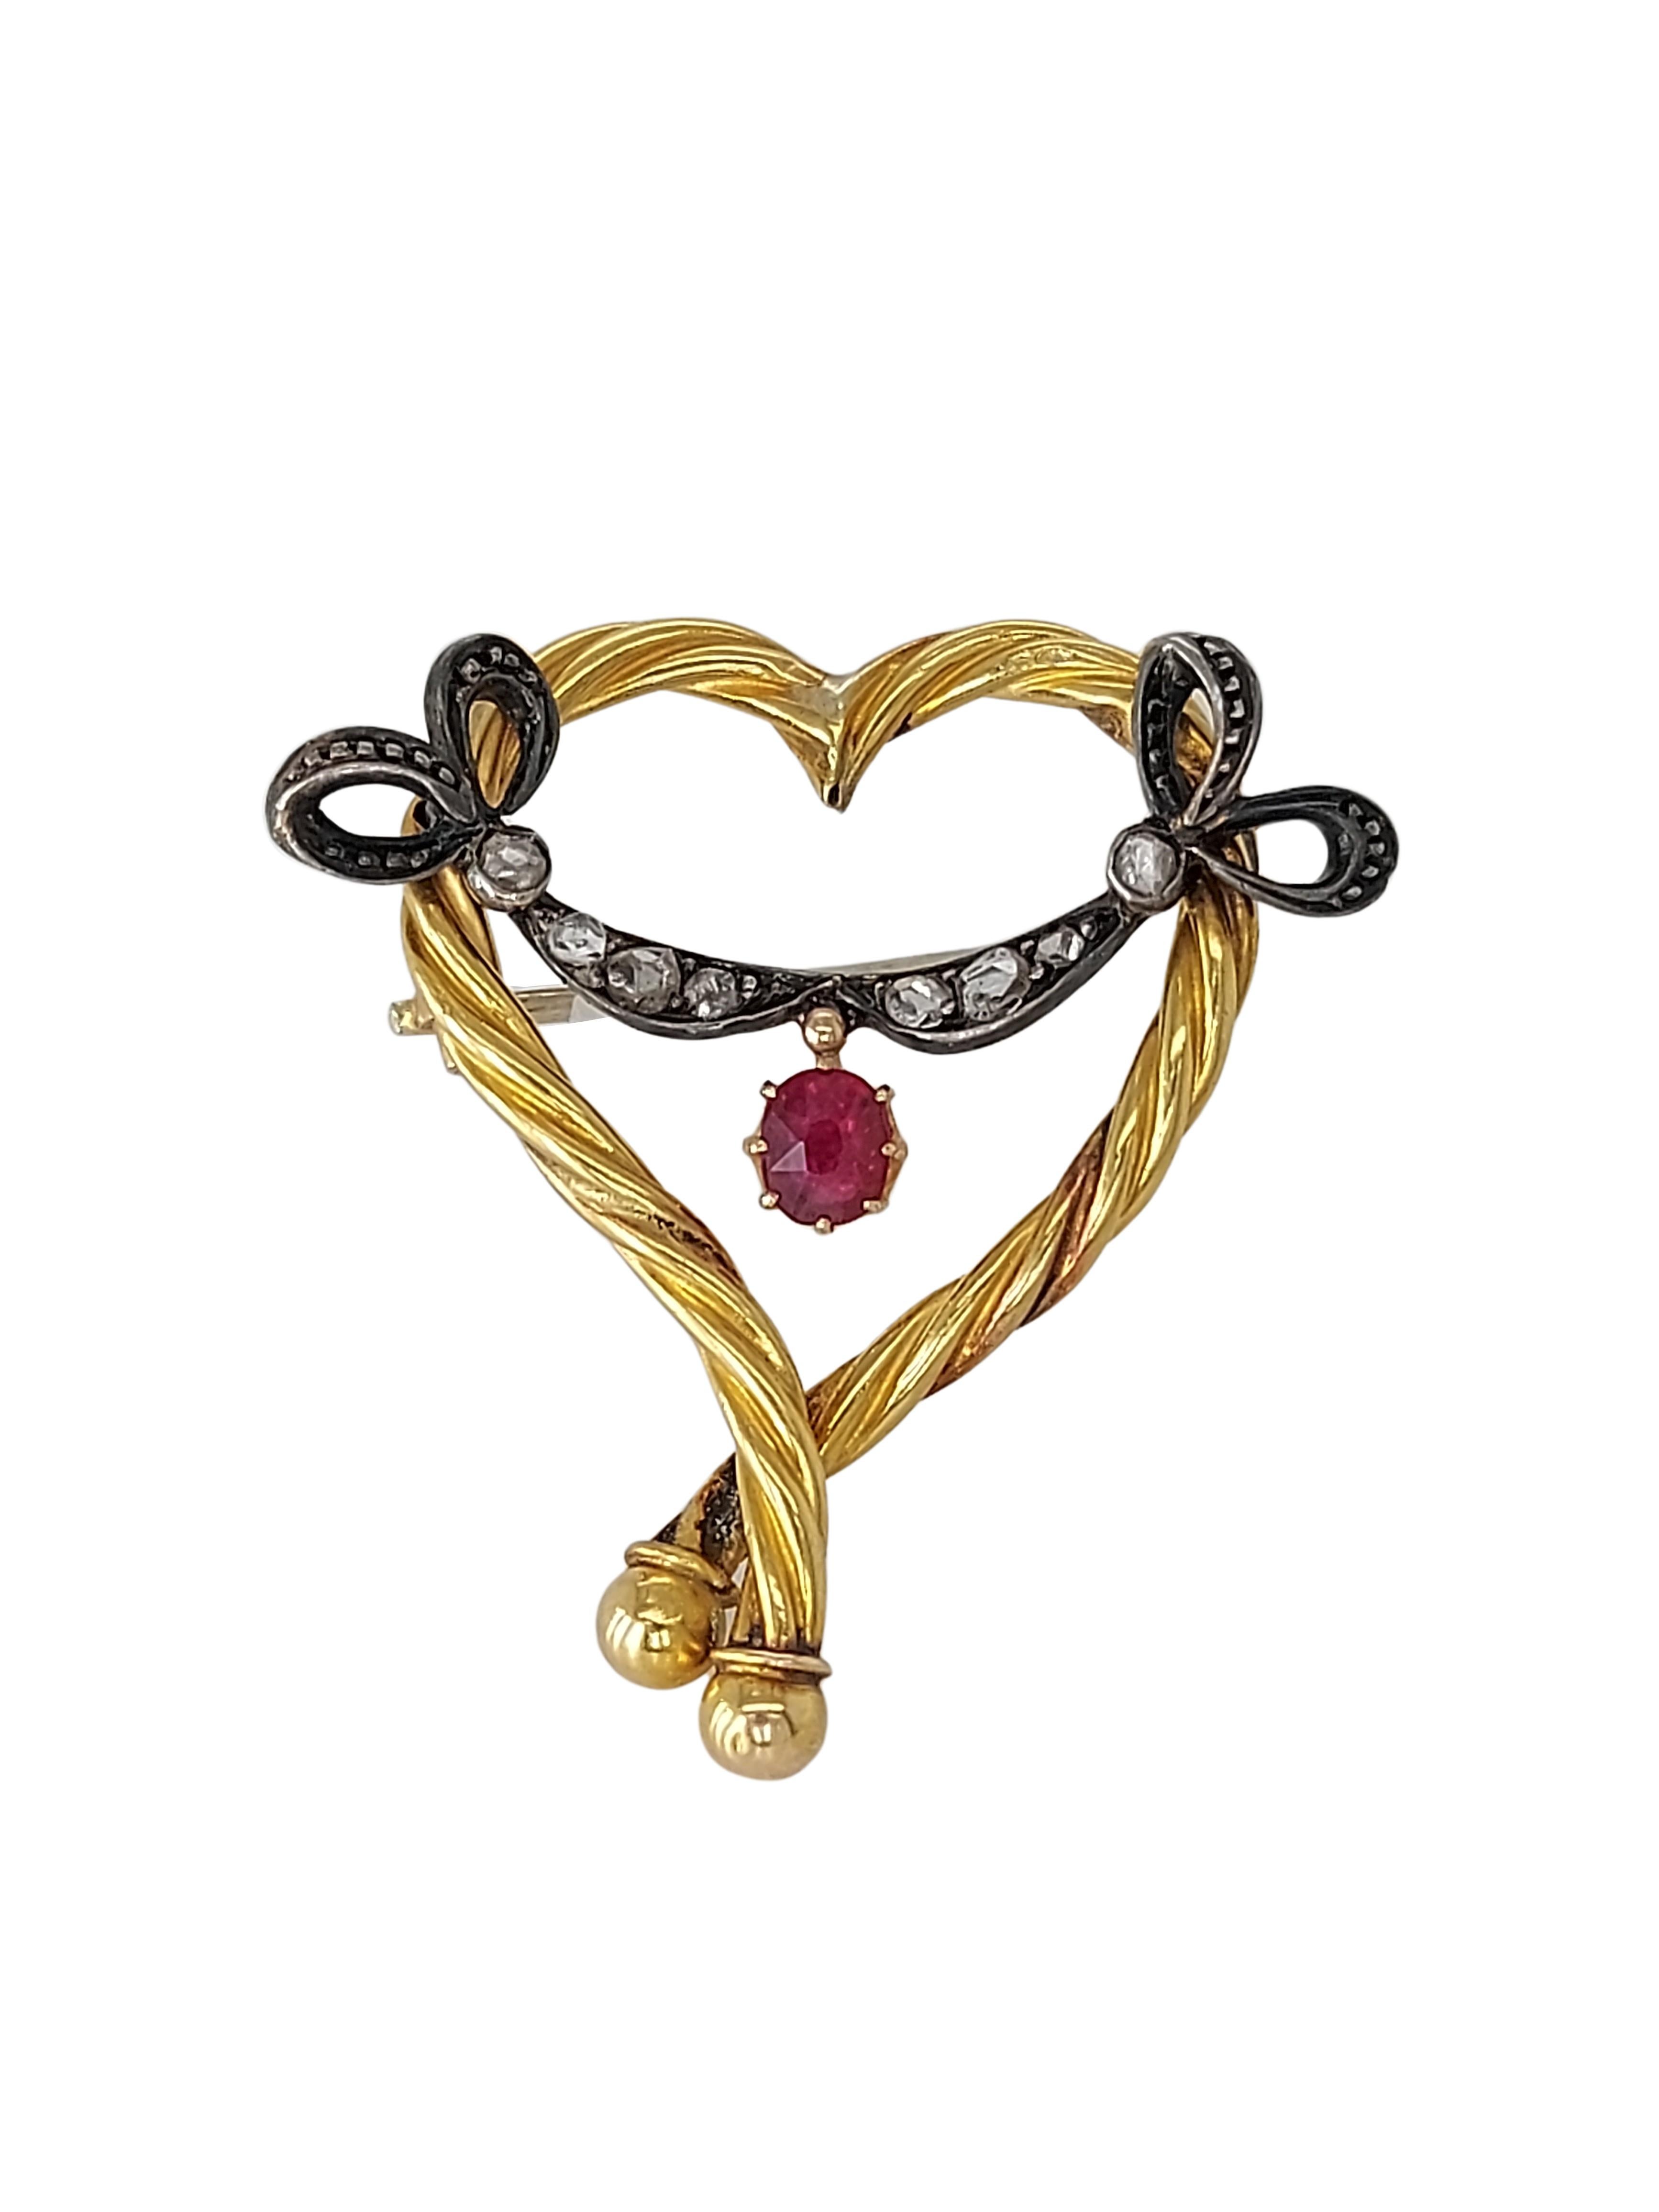 Lovely heart shaped 18kt Yellow Gold brooch with dangling natural Ruby & old cut diamonds set in Gold & Silver

Diamonds: 8 old cut diamonds set in silver

Ruby: Natural ruby, oval shape 3 mm x 4 mm

Material: 18kt Yellow gold and silver

Total